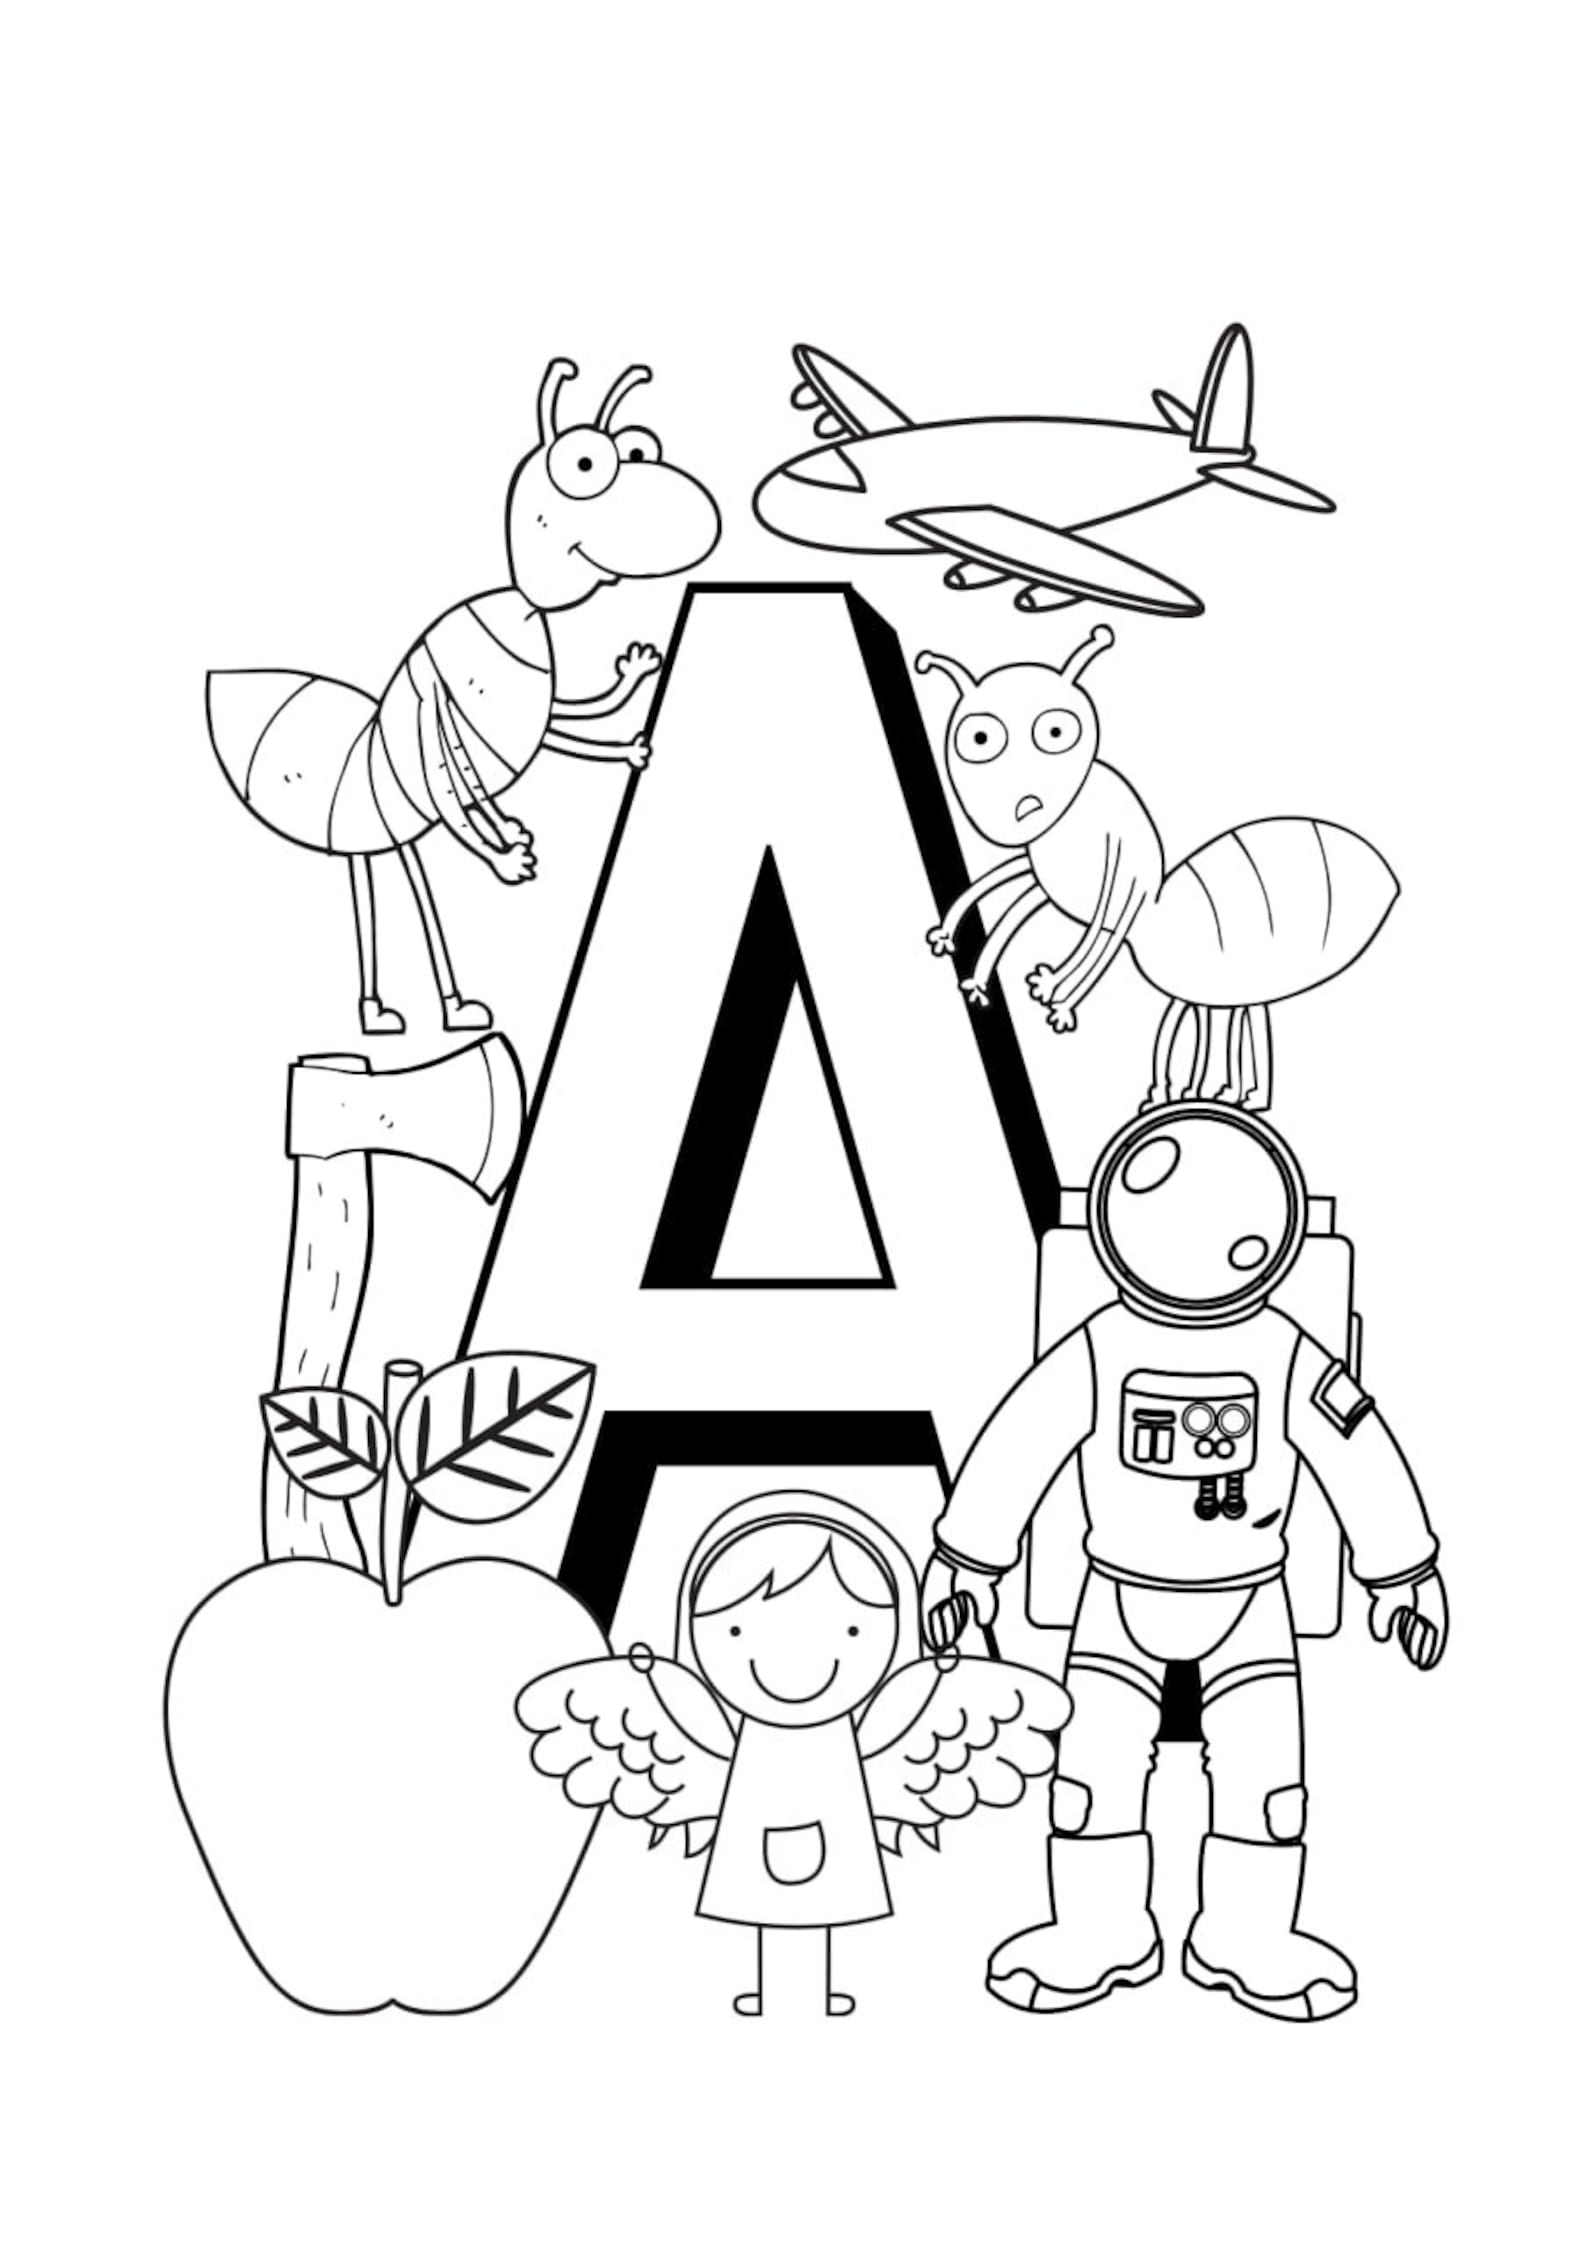 printable-learning-coloring-pages-for-kids